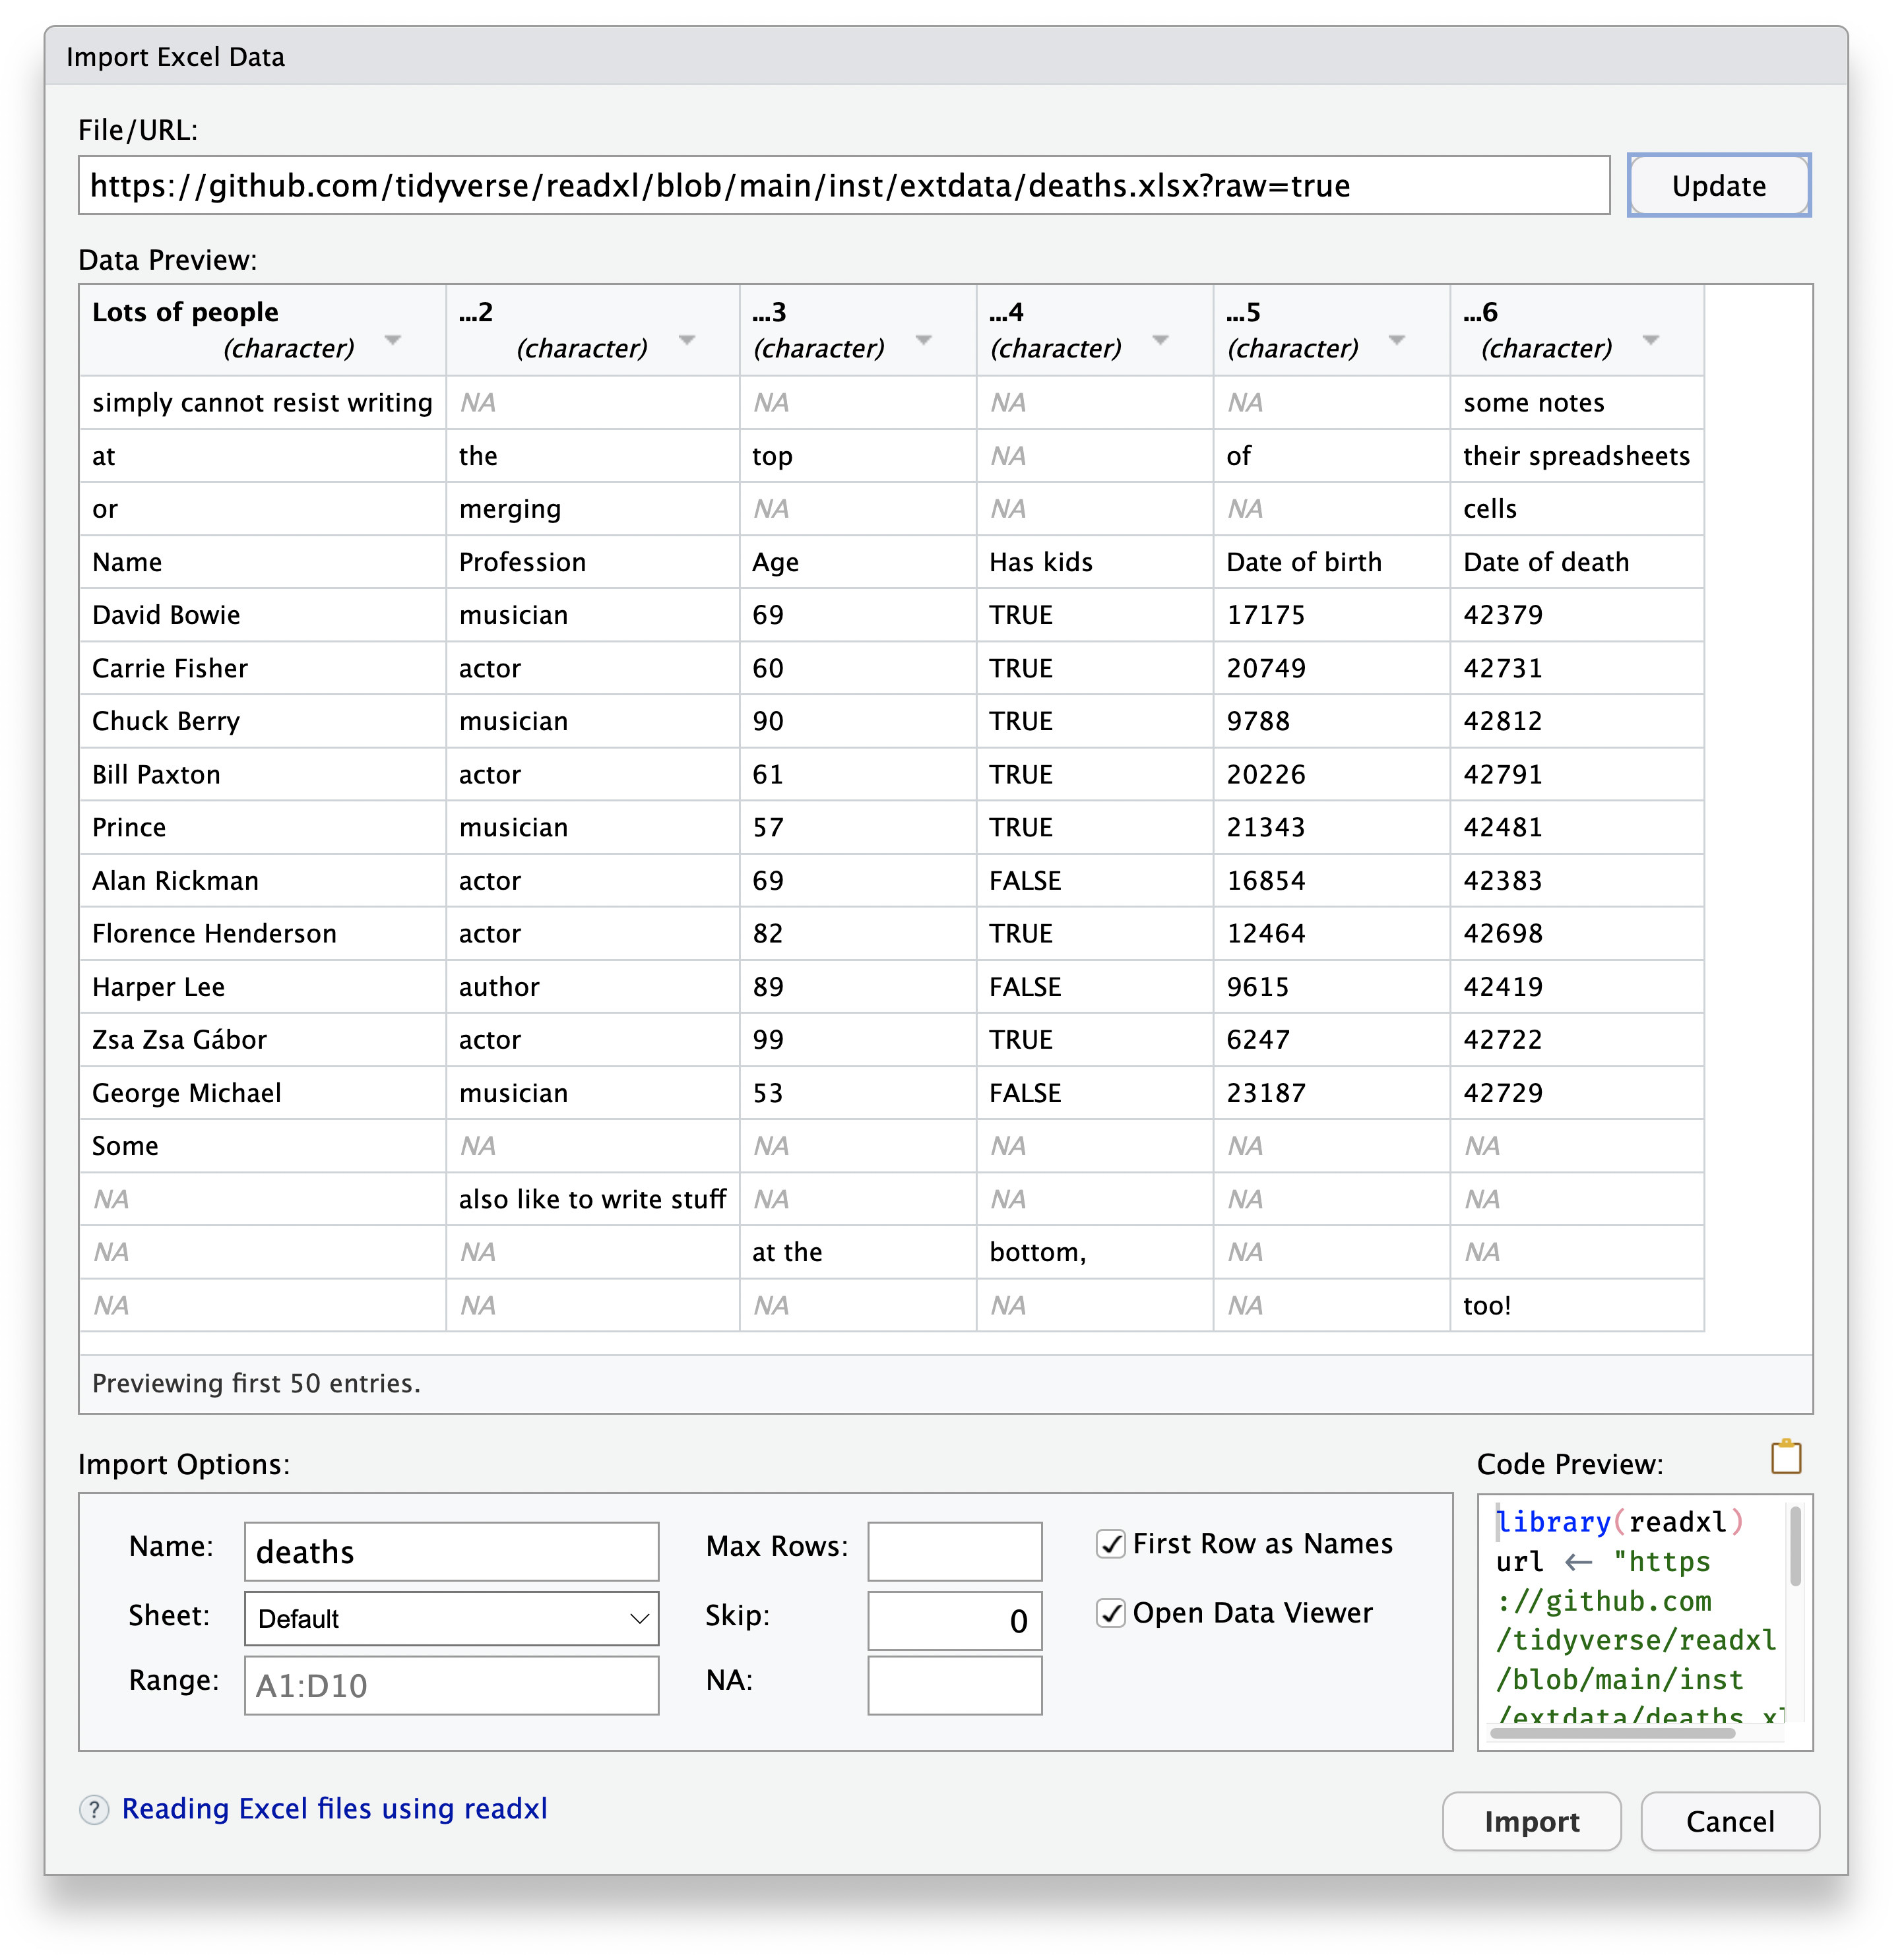 A screenshot of the Import Excel Data popup wizard.